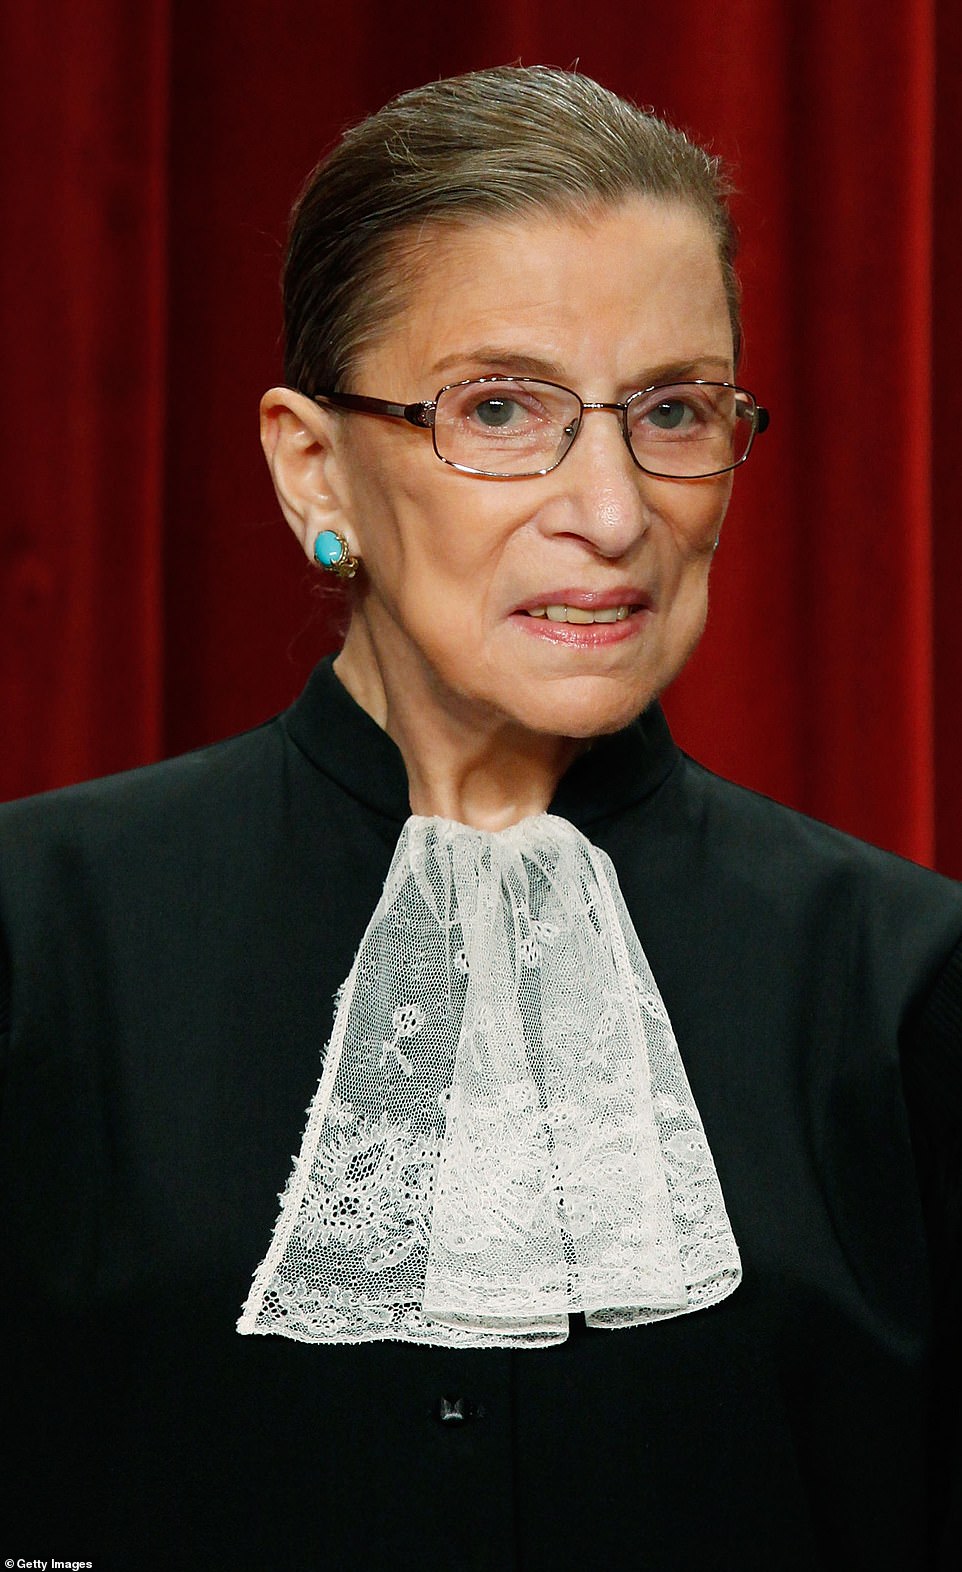 Justice Ruth Bader Ginsburg (pictured 2009) died aged 87 after a battle with metastatic pancreas cancer, the Supreme Court has announced